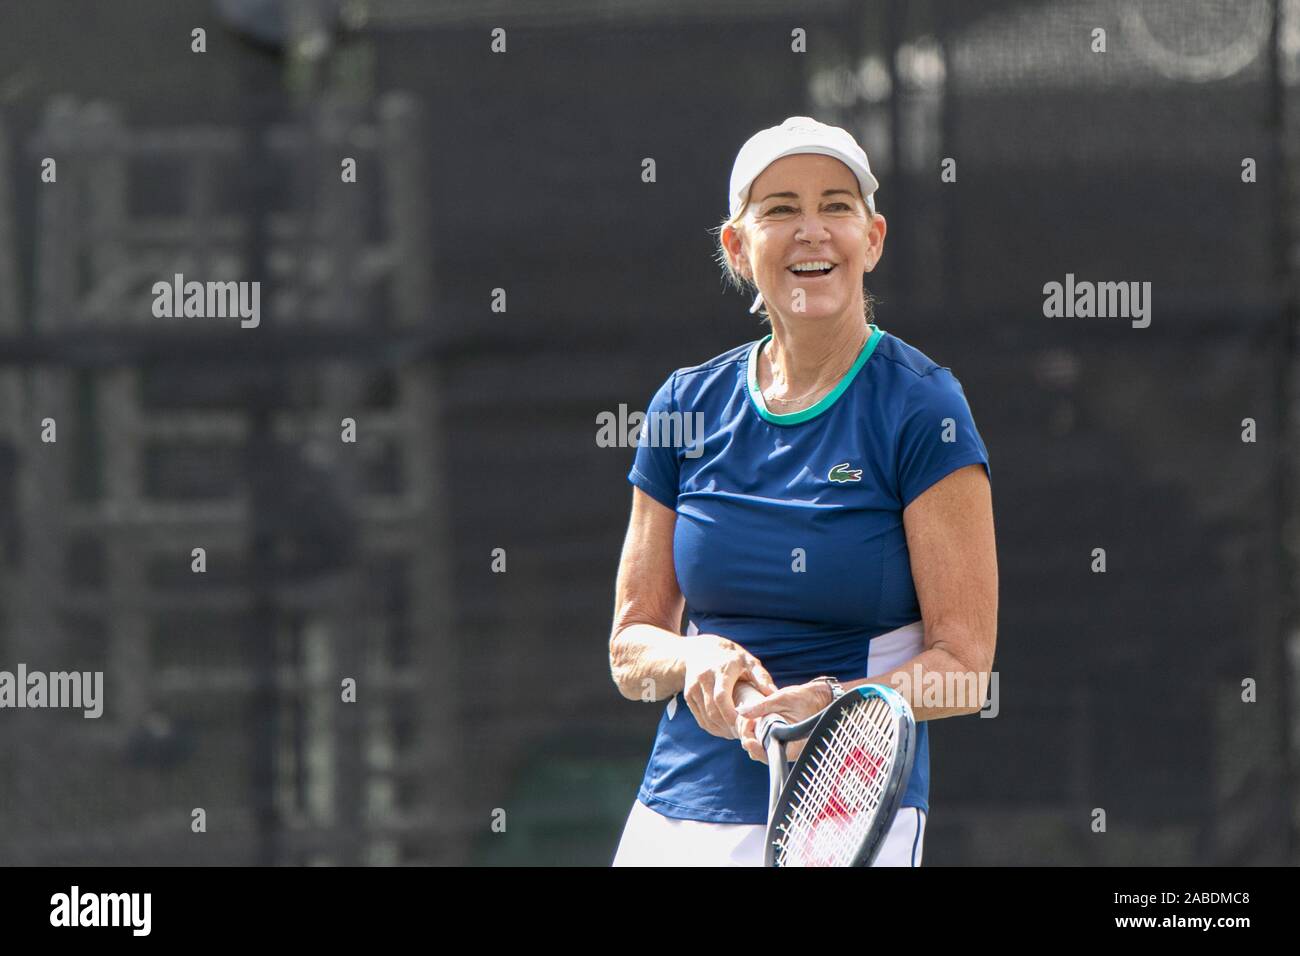 Chris Evert playing at the Chris Evert Pro Celebrity Tennis Classic in Boca Raton Resort and Spa on November 22 2019, in Boca Raton, FL Stock Photo